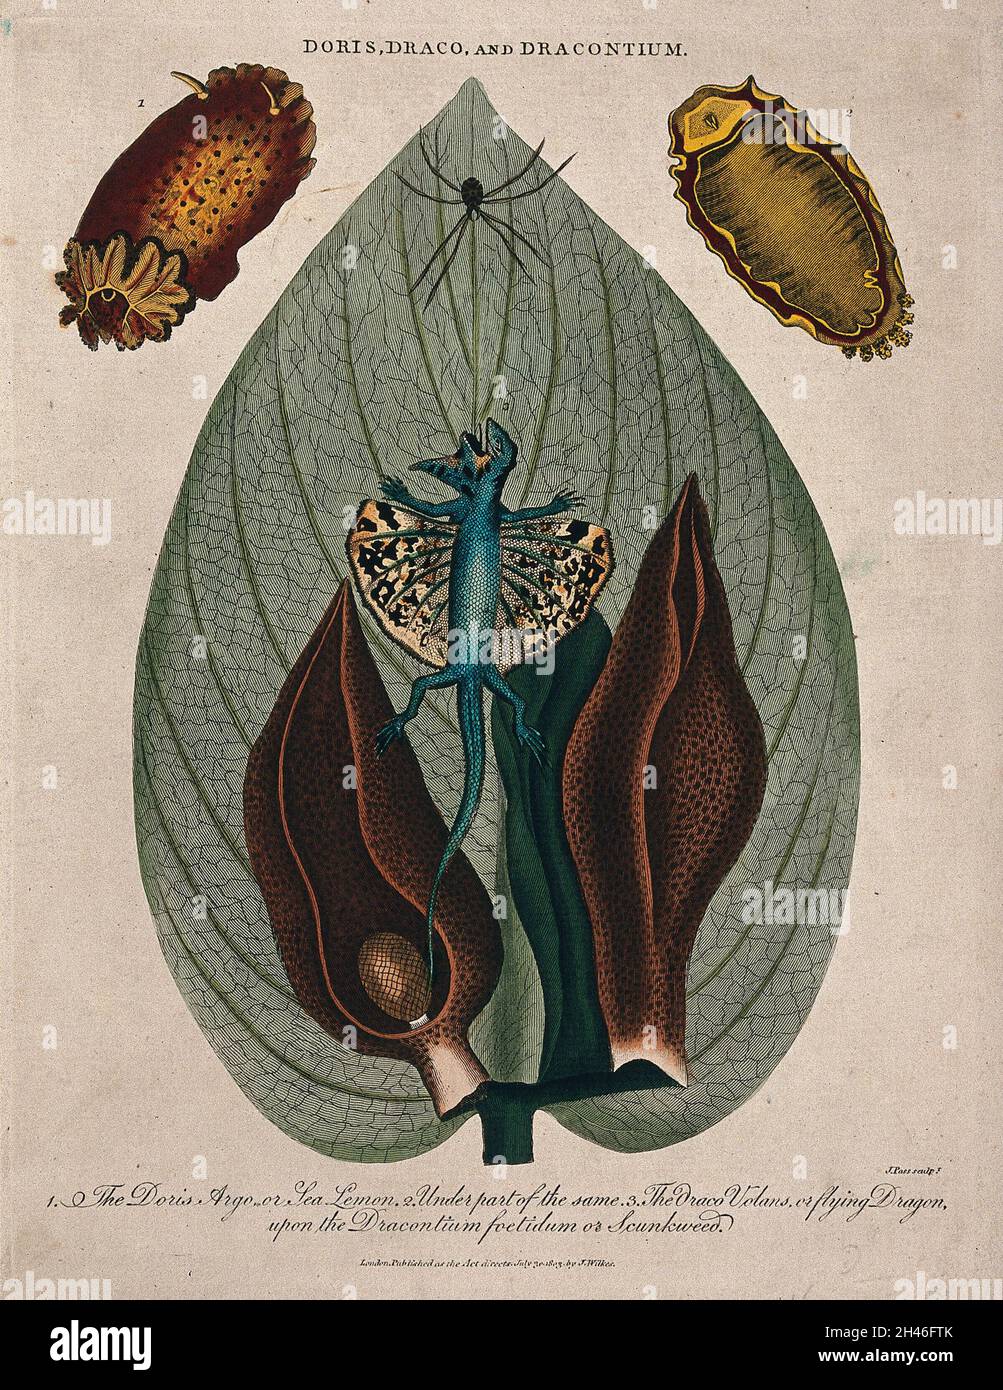 Leaf and flowers of skunk cabbage (Symplocarpus foetidum), a type of mollusc (Doris argo) and a dragon lizard (Draco volans). Coloured etching by J. Pass, c. 1803, after J. Ihle. Stock Photo